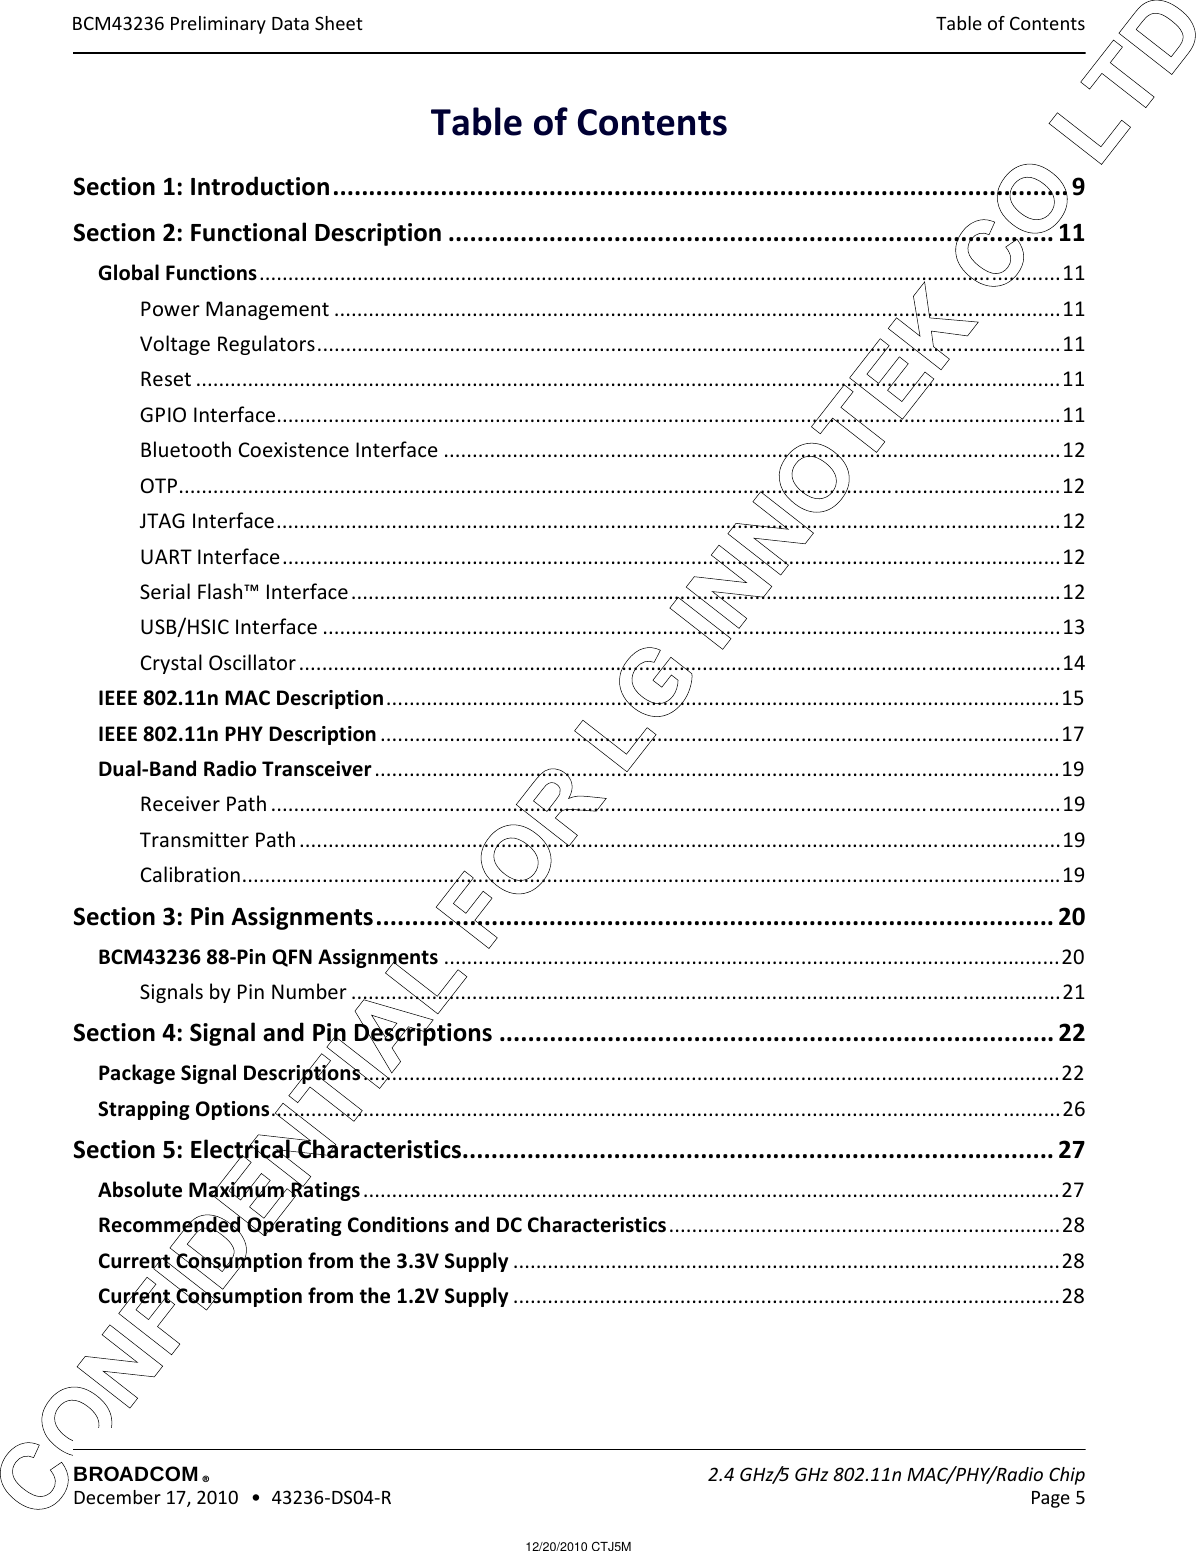 12/20/2010 CTJ5MCONFIDENTIAL FOR LG INNOTEK CO LTD Table of Contents BCM43236 Preliminary Data SheetBROADCOM    2.4 GHz/5 GHz 802.11n MAC/PHY/Radio Chip December 17, 2010   •  43236-DS04-R Page 5®Table of ContentsSection 1: Introduction...................................................................................................... 9Section 2: Functional Description .................................................................................... 11Global Functions...........................................................................................................................................11Power Management ..............................................................................................................................11Voltage Regulators.................................................................................................................................11Reset ......................................................................................................................................................11GPIO Interface........................................................................................................................................11Bluetooth Coexistence Interface ...........................................................................................................12OTP.........................................................................................................................................................12JTAG Interface........................................................................................................................................12UART Interface.......................................................................................................................................12Serial Flash™ Interface...........................................................................................................................12USB/HSIC Interface ................................................................................................................................13Crystal Oscillator ....................................................................................................................................14IEEE 802.11n MAC Description.....................................................................................................................15IEEE 802.11n PHY Description ......................................................................................................................17Dual-Band Radio Transceiver.......................................................................................................................19Receiver Path .........................................................................................................................................19Transmitter Path ....................................................................................................................................19Calibration..............................................................................................................................................19Section 3: Pin Assignments.............................................................................................. 20BCM43236 88-Pin QFN Assignments ...........................................................................................................20Signals by Pin Number ...........................................................................................................................21Section 4: Signal and Pin Descriptions ............................................................................. 22Package Signal Descriptions.........................................................................................................................22Strapping Options.........................................................................................................................................26Section 5: Electrical Characteristics.................................................................................. 27Absolute Maximum Ratings.........................................................................................................................27Recommended Operating Conditions and DC Characteristics....................................................................28Current Consumption from the 3.3V Supply ...............................................................................................28Current Consumption from the 1.2V Supply ...............................................................................................28